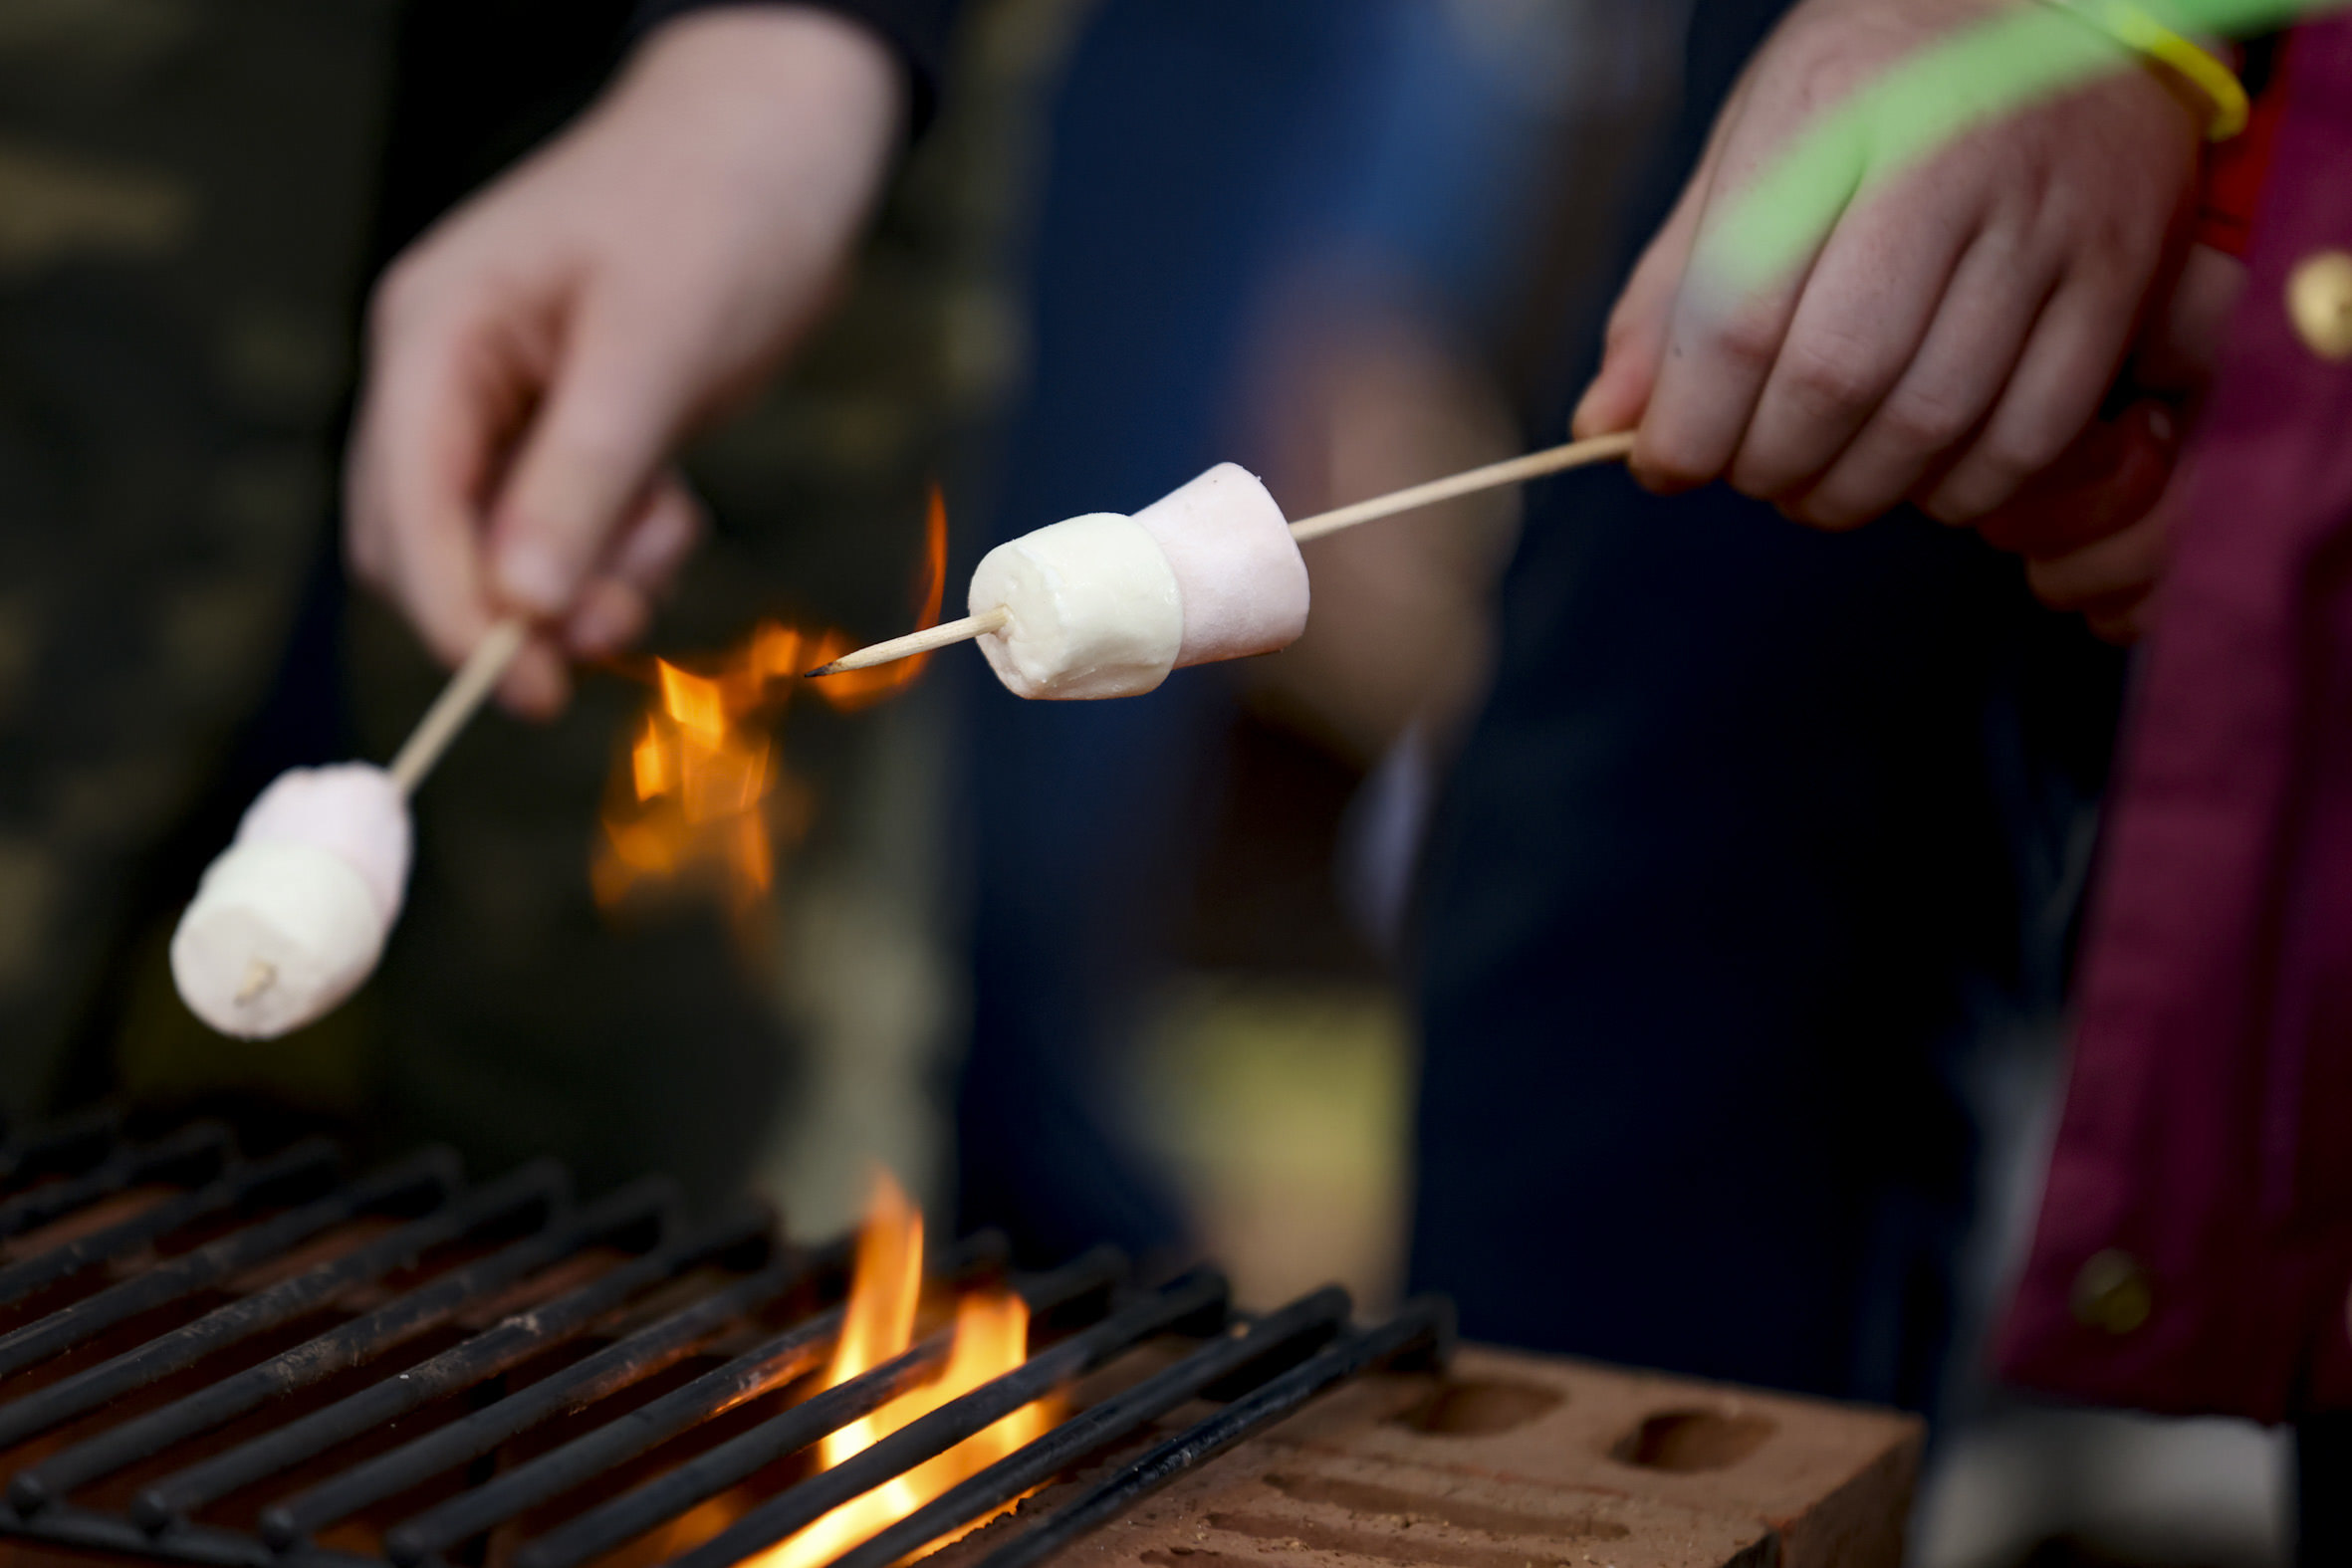 Preparing some delicious marshmallows over the flame.